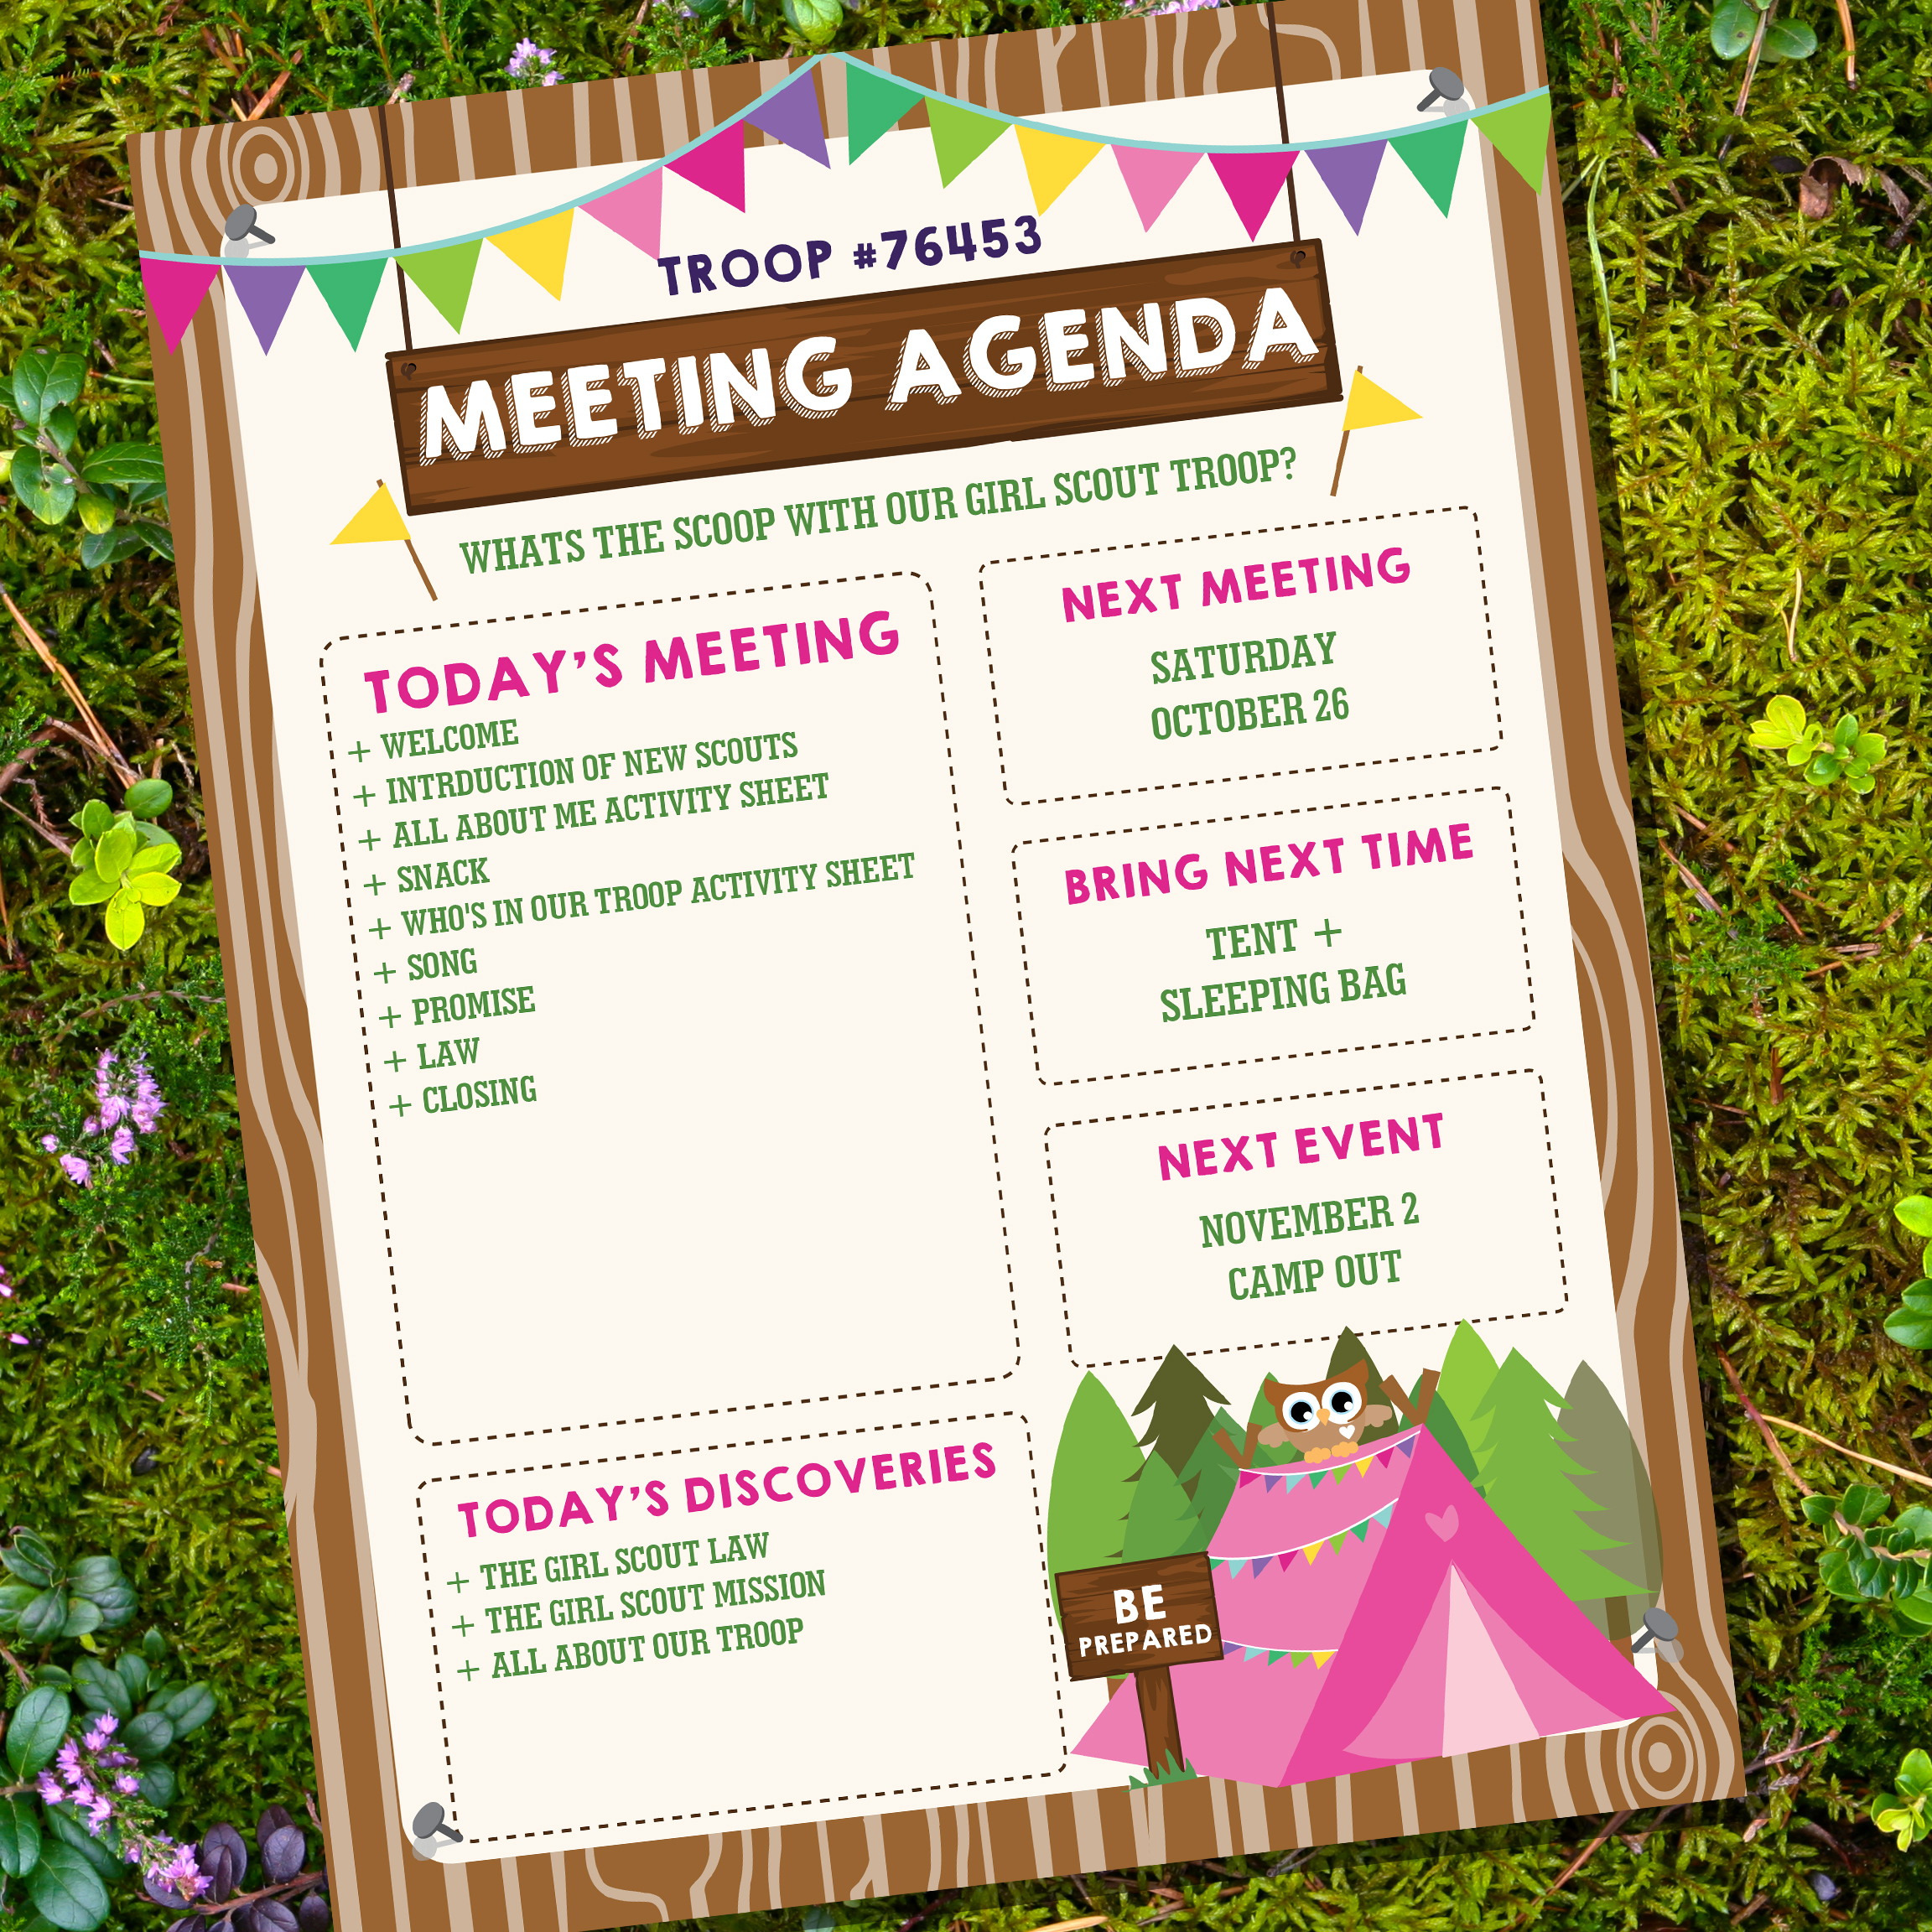 Be prepared meeting agenda for girl scouts, brownies or daisies 